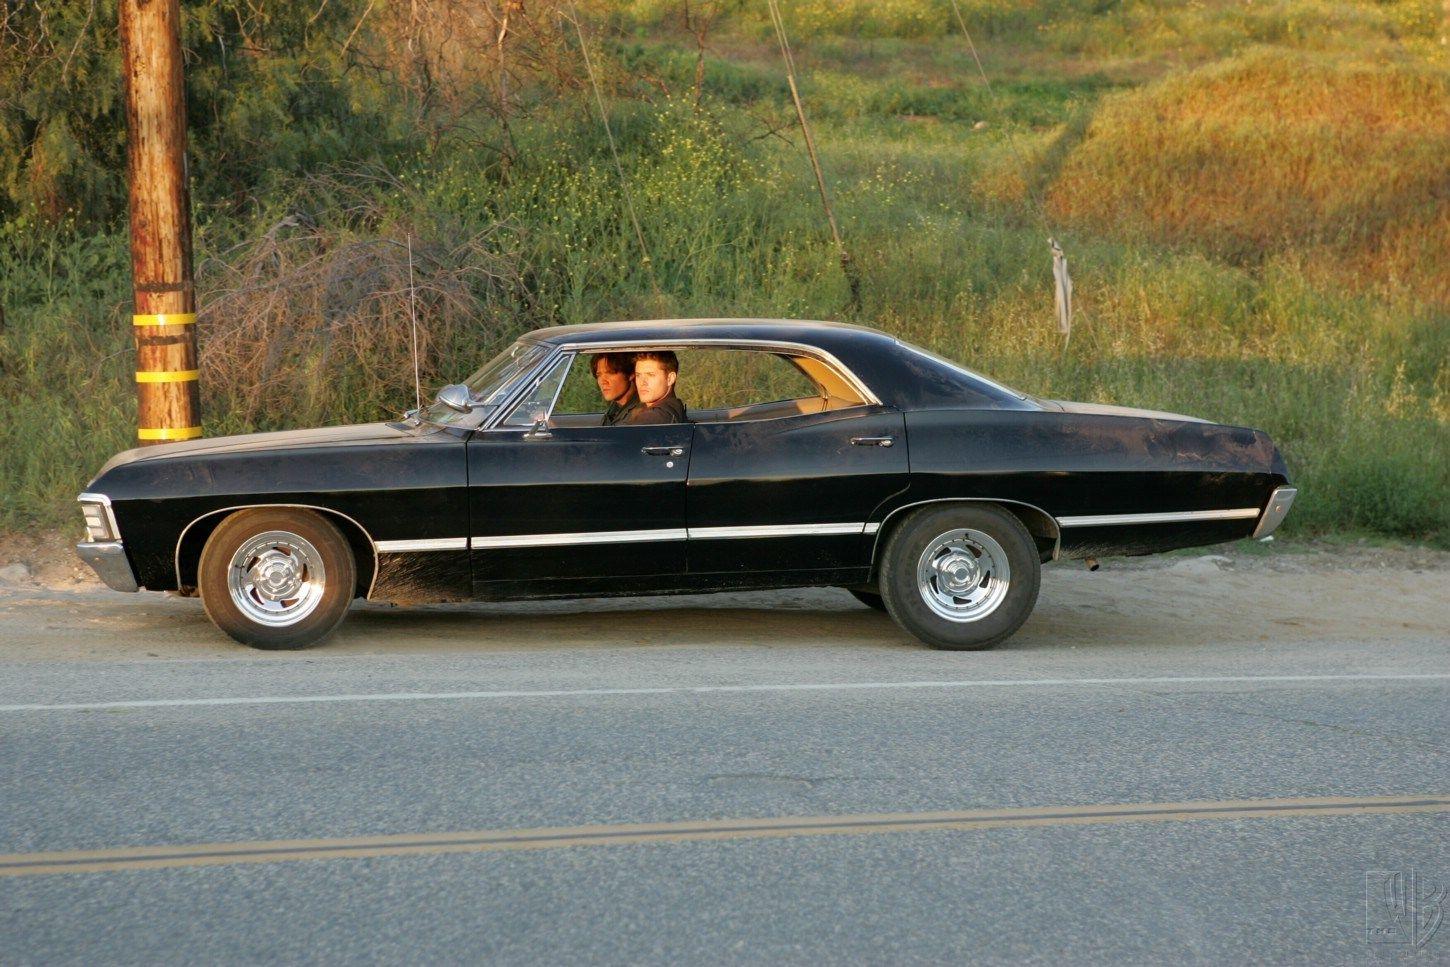 1967 Chevrolet Impala Wallpaper for iPhone 5